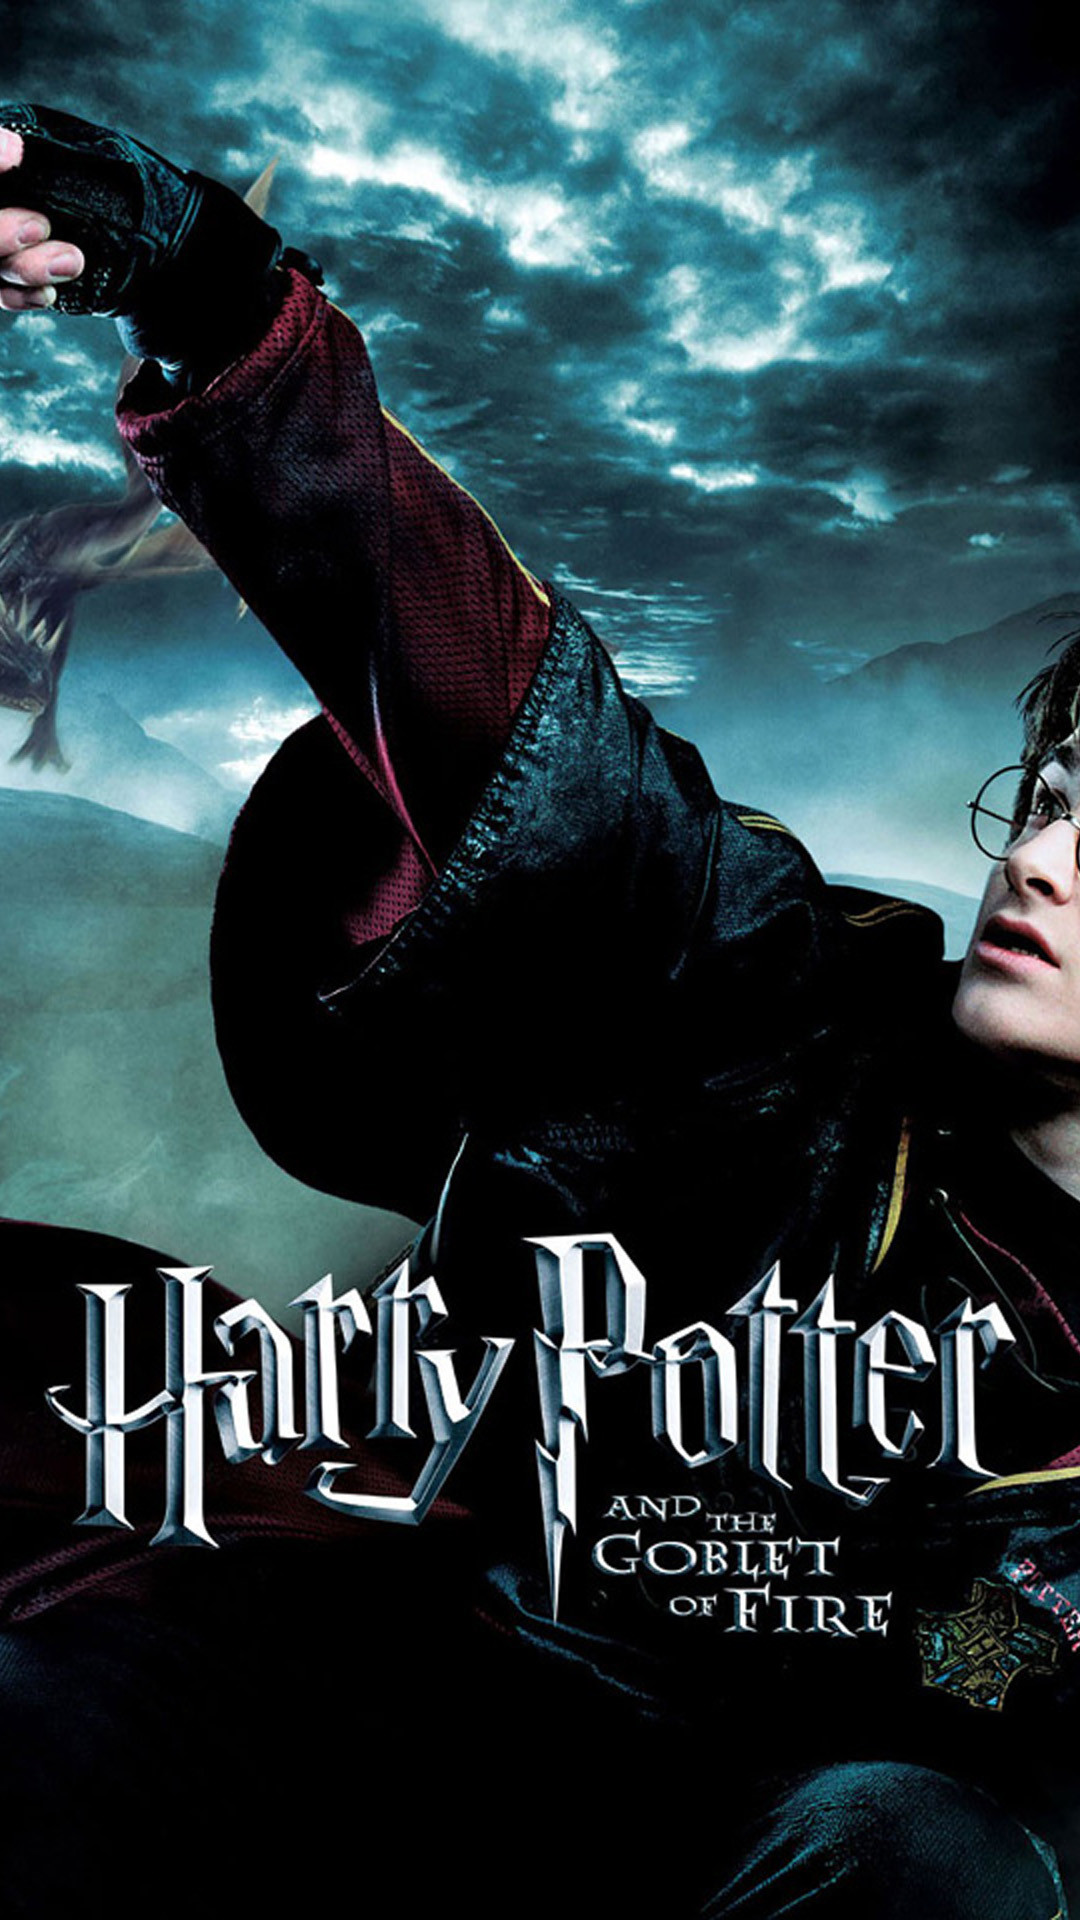 potter wallpaper,movie,poster,album cover,book cover,fictional character